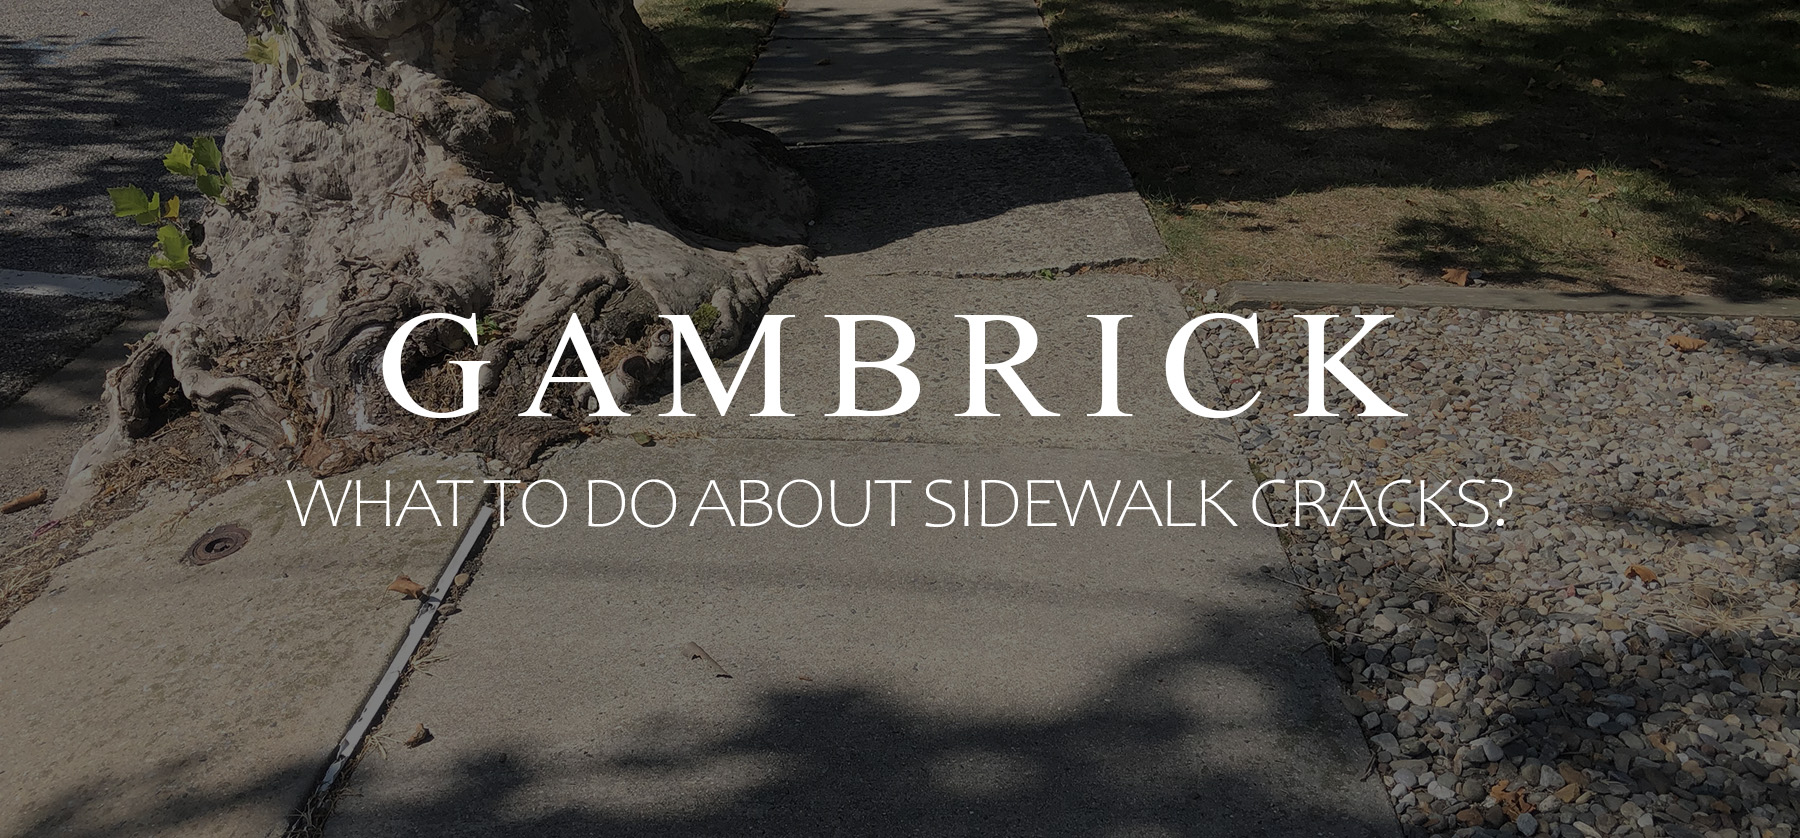 what to do about sidewalk cracks banner 1.0